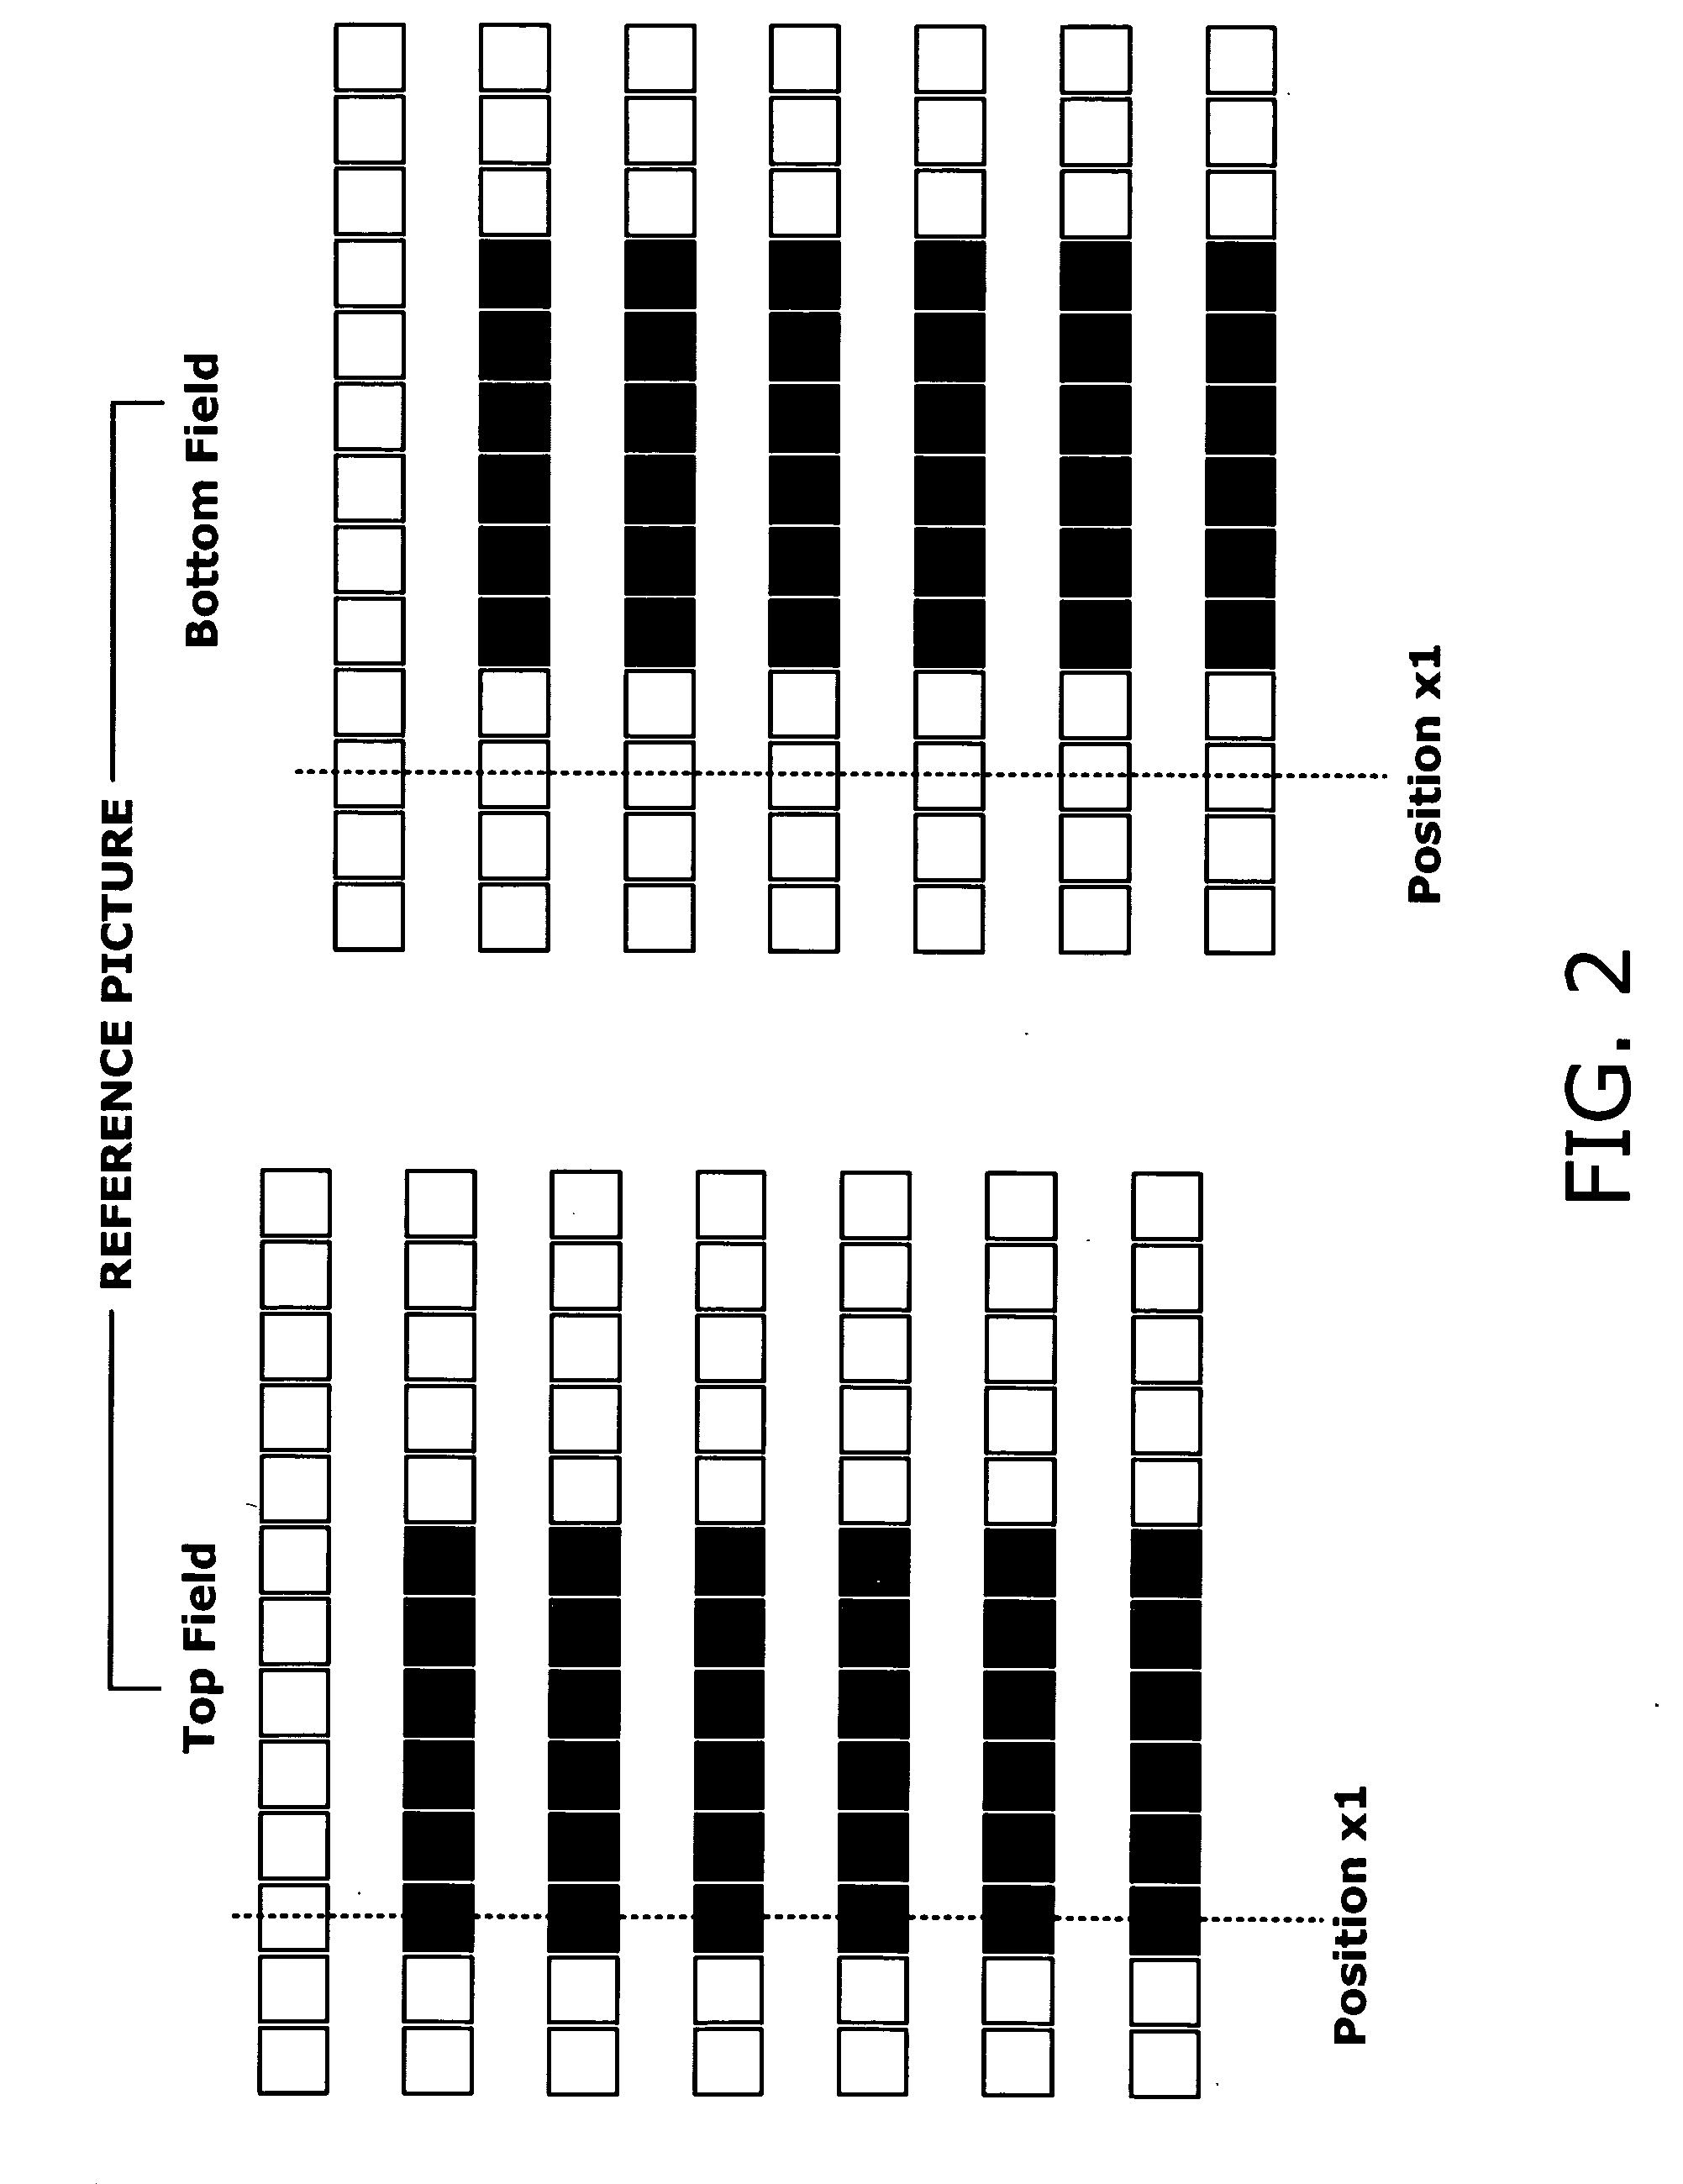 Motion estimation and compensation device with motion vector correction based on vertical component values